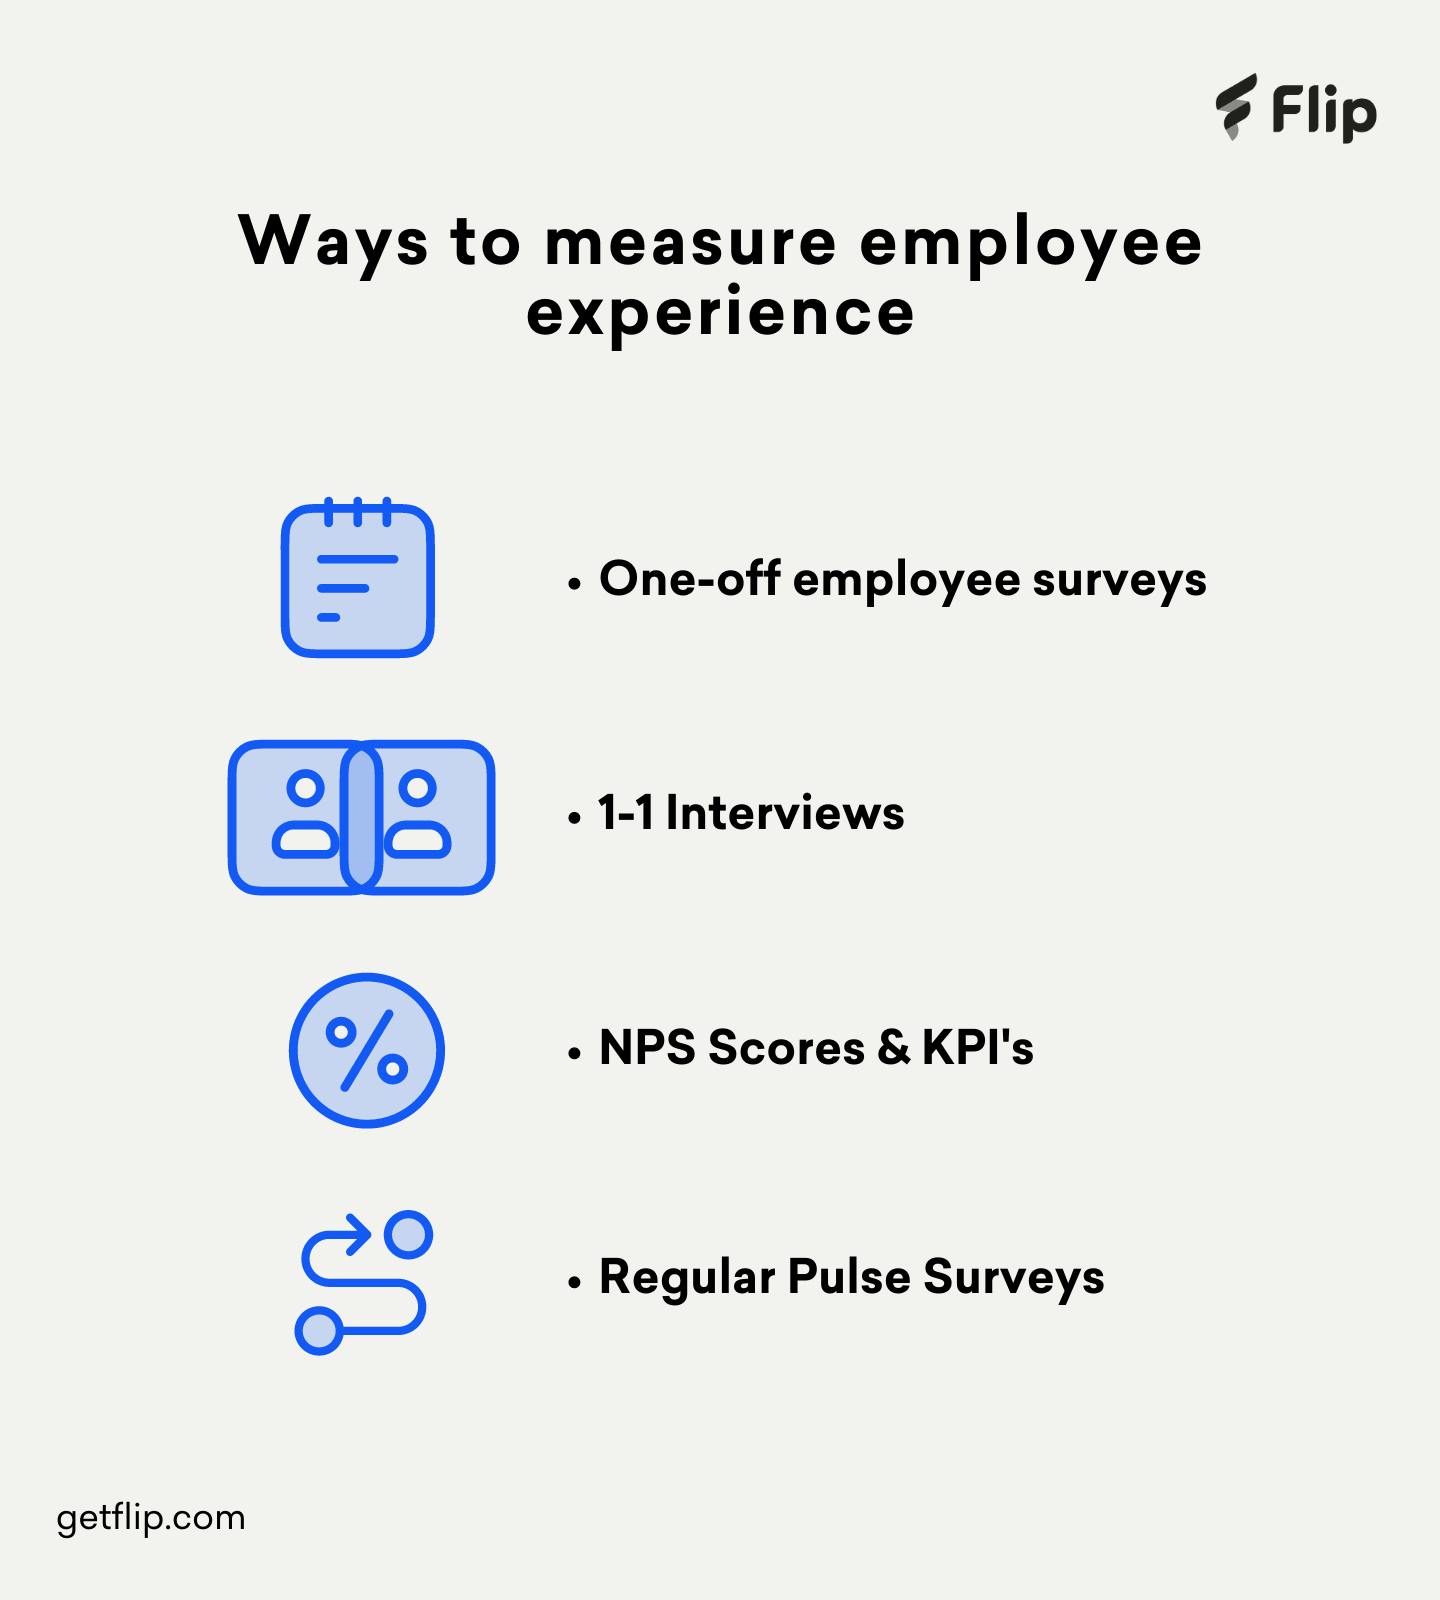 A visual portraying different ways to measure employee experience